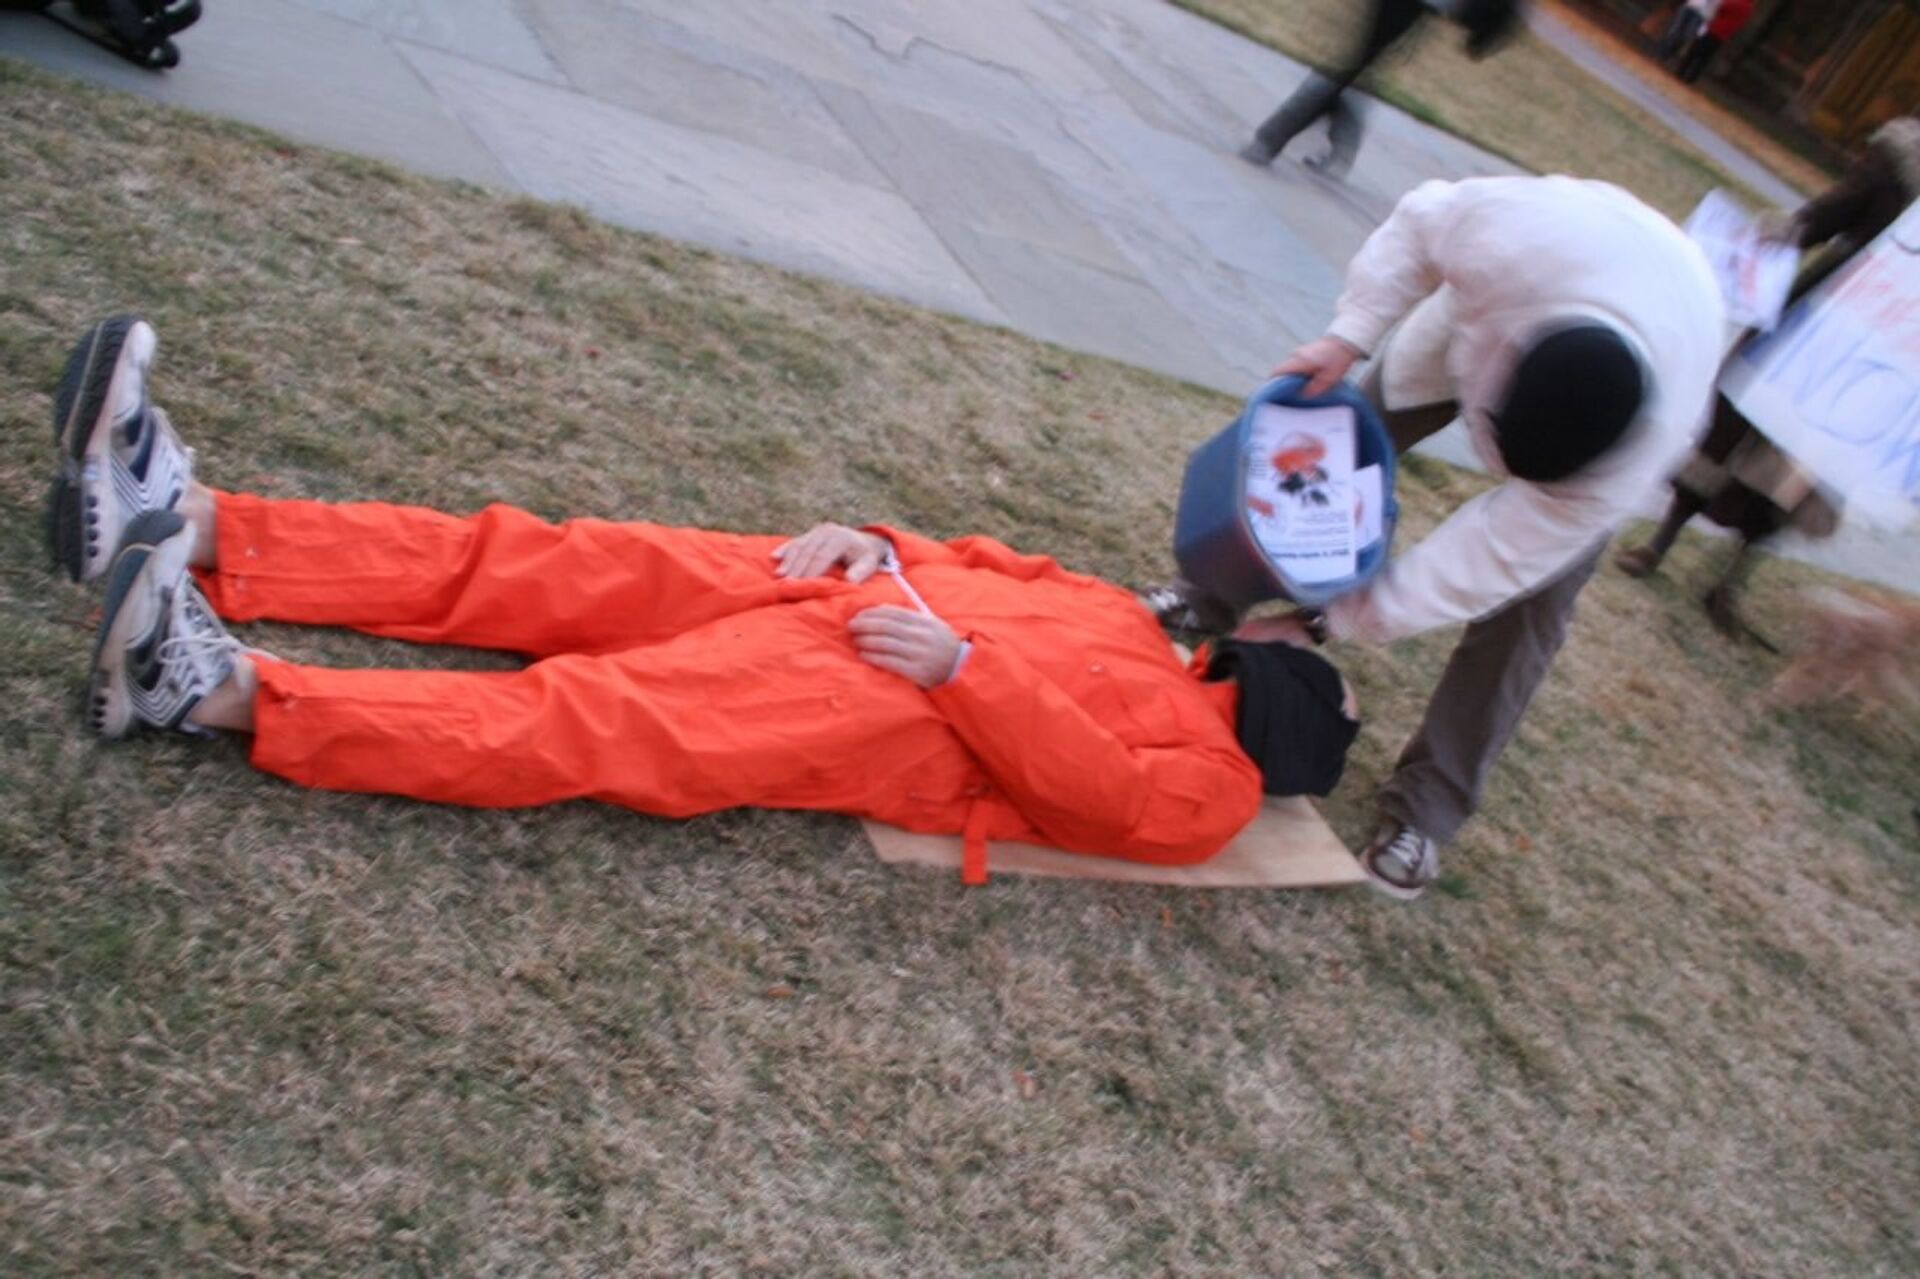 Students protest at a talk given by Karl Rove by demonstrating waterboarding at Duke University on December 4, 2007 - Sputnik International, 1920, 09.09.2021